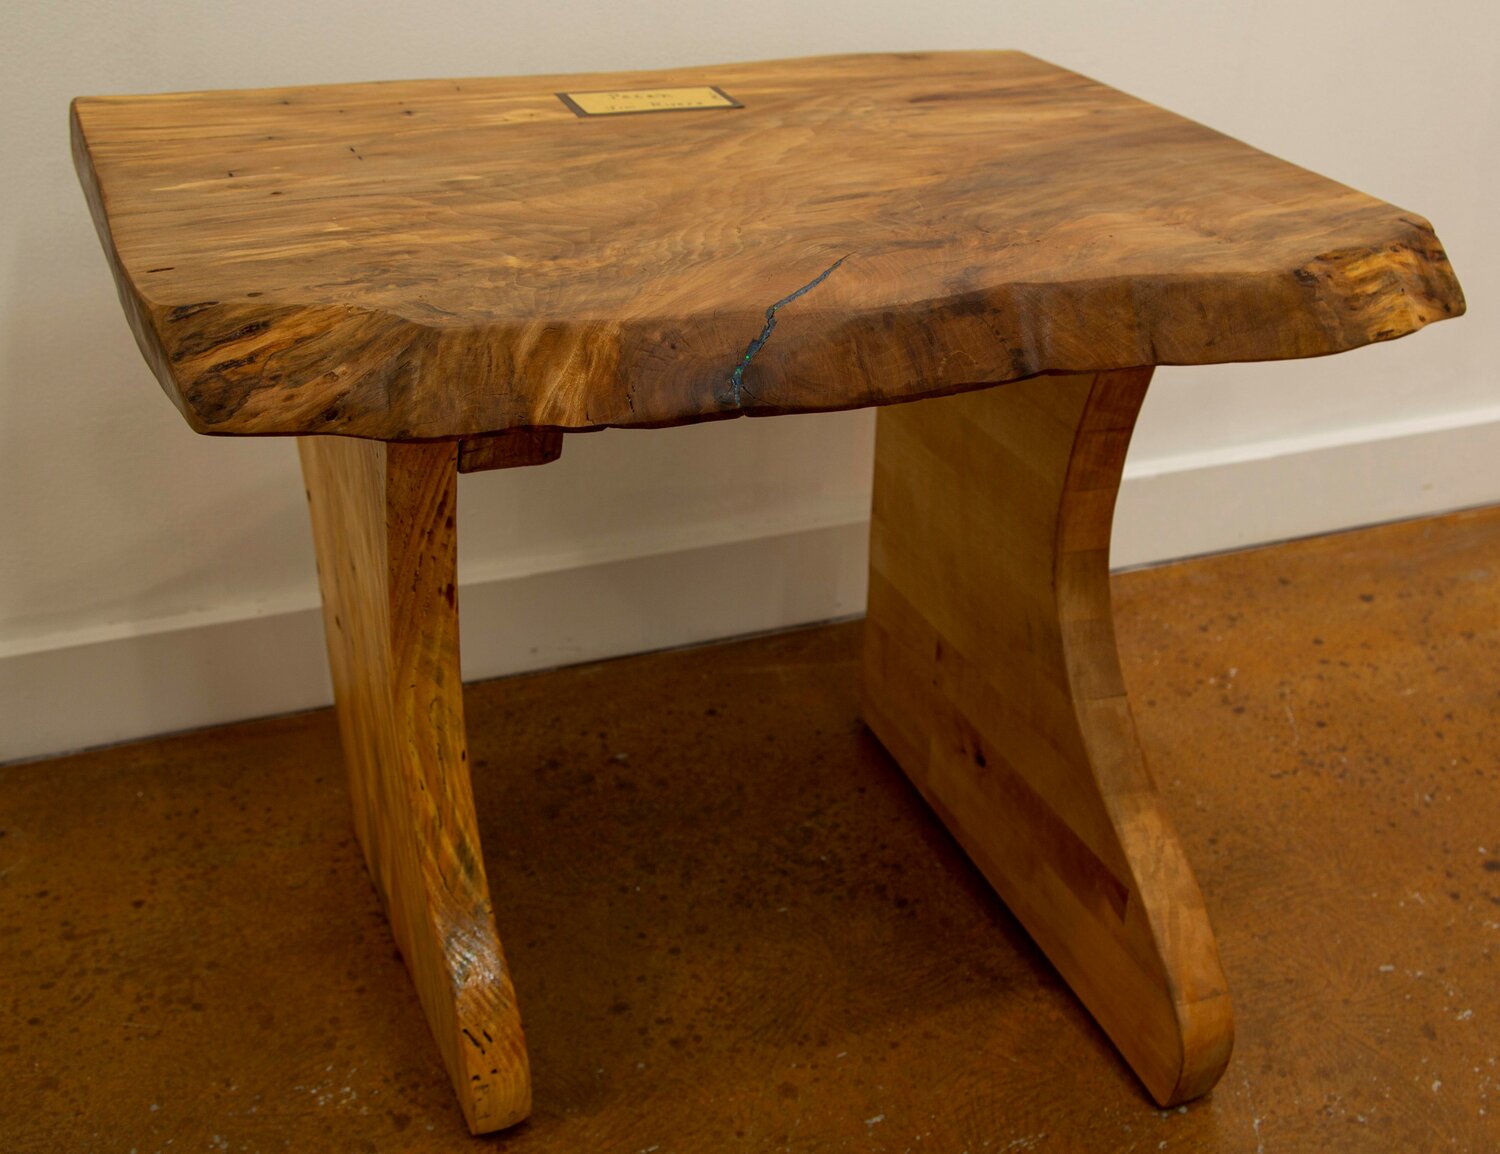 A table Rivers made.